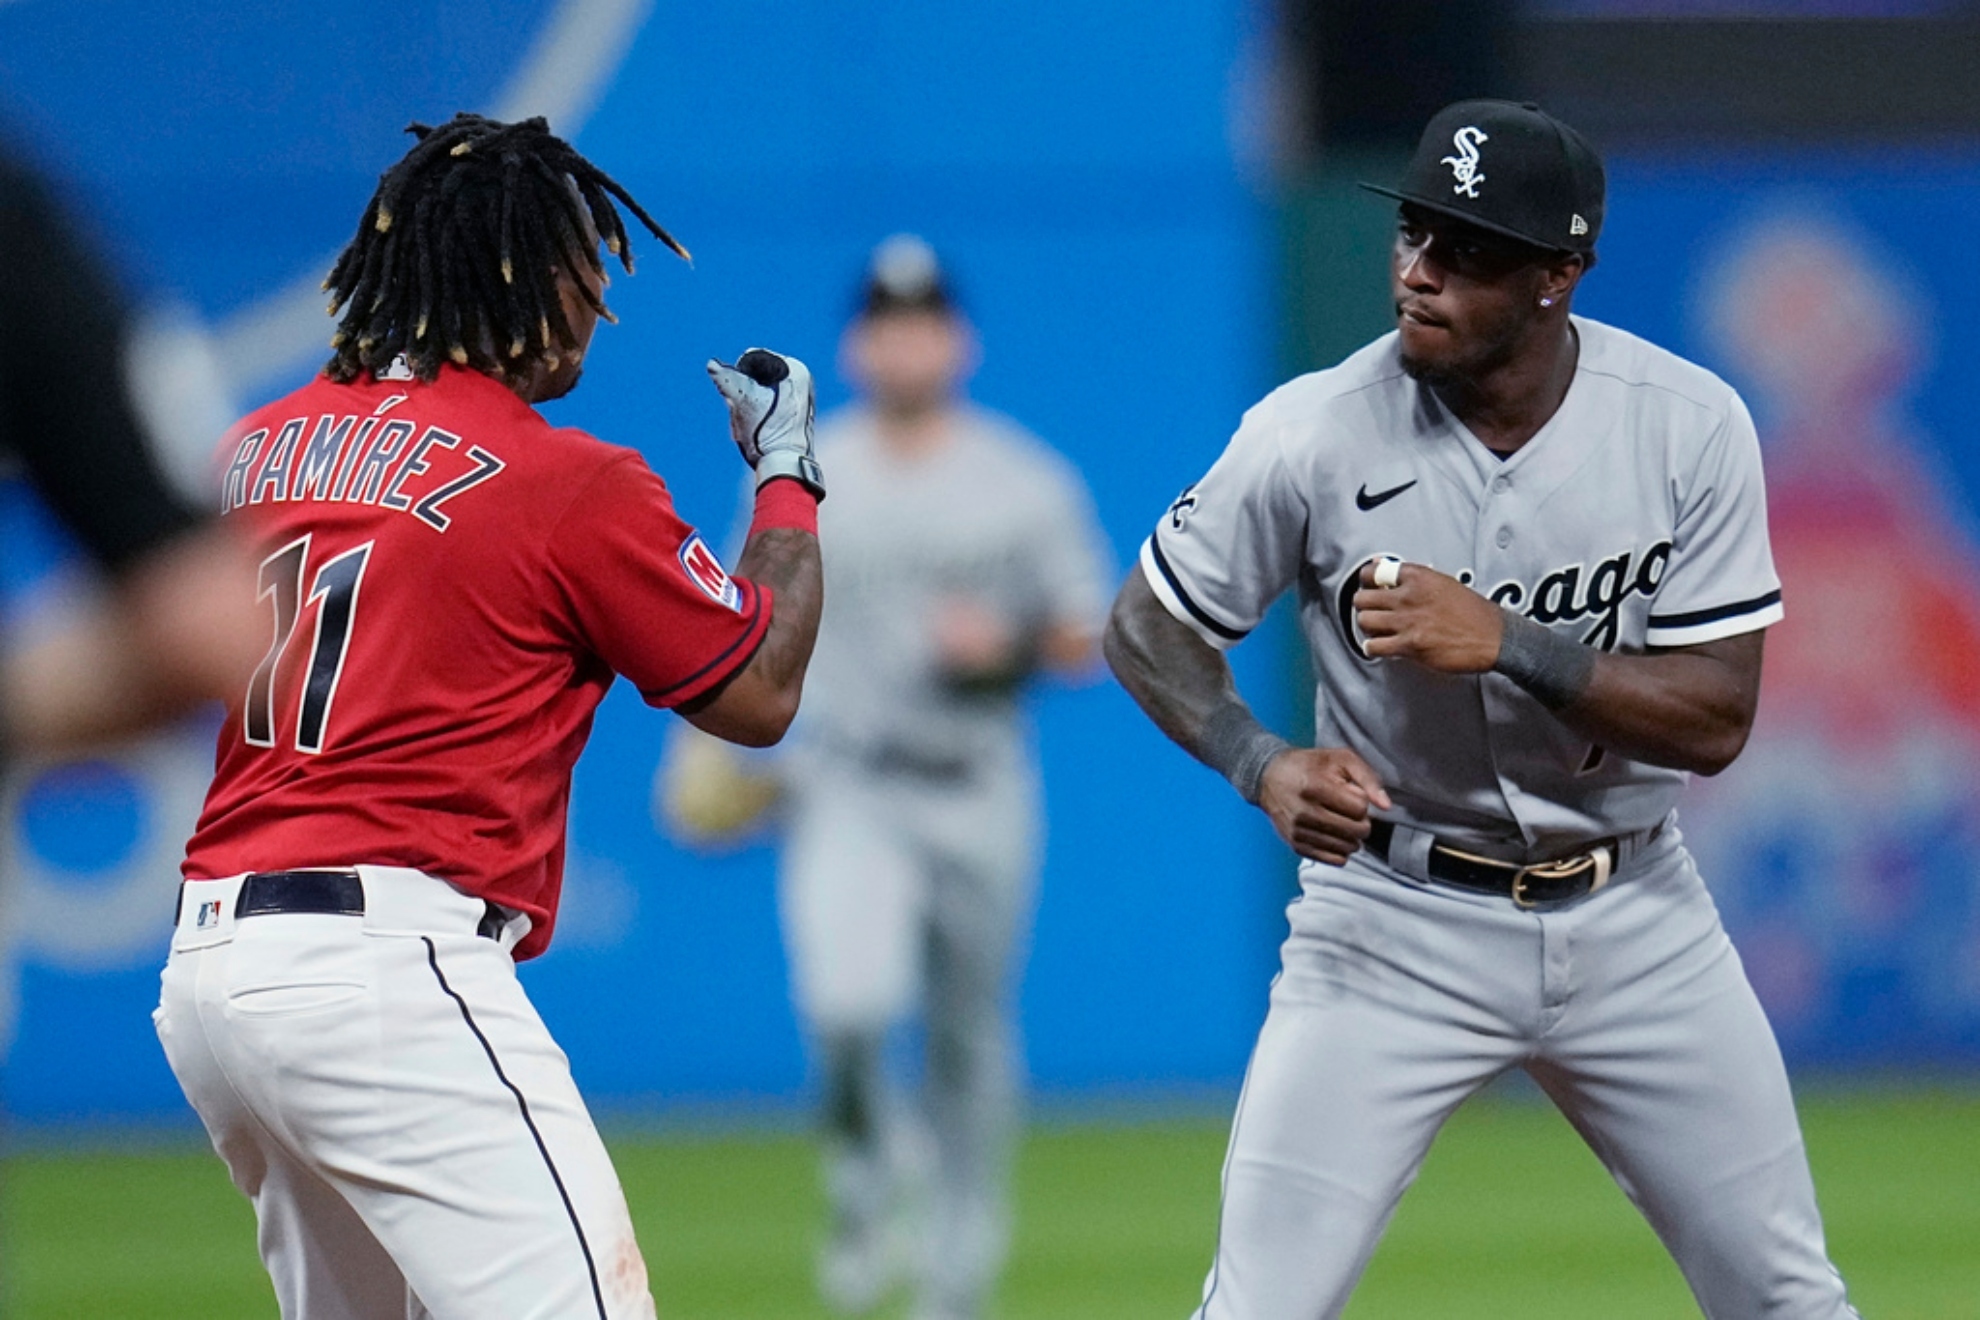 Guardians' Jose Ramirez knocks out White Sox's Tim Anderson during on-field fistfight